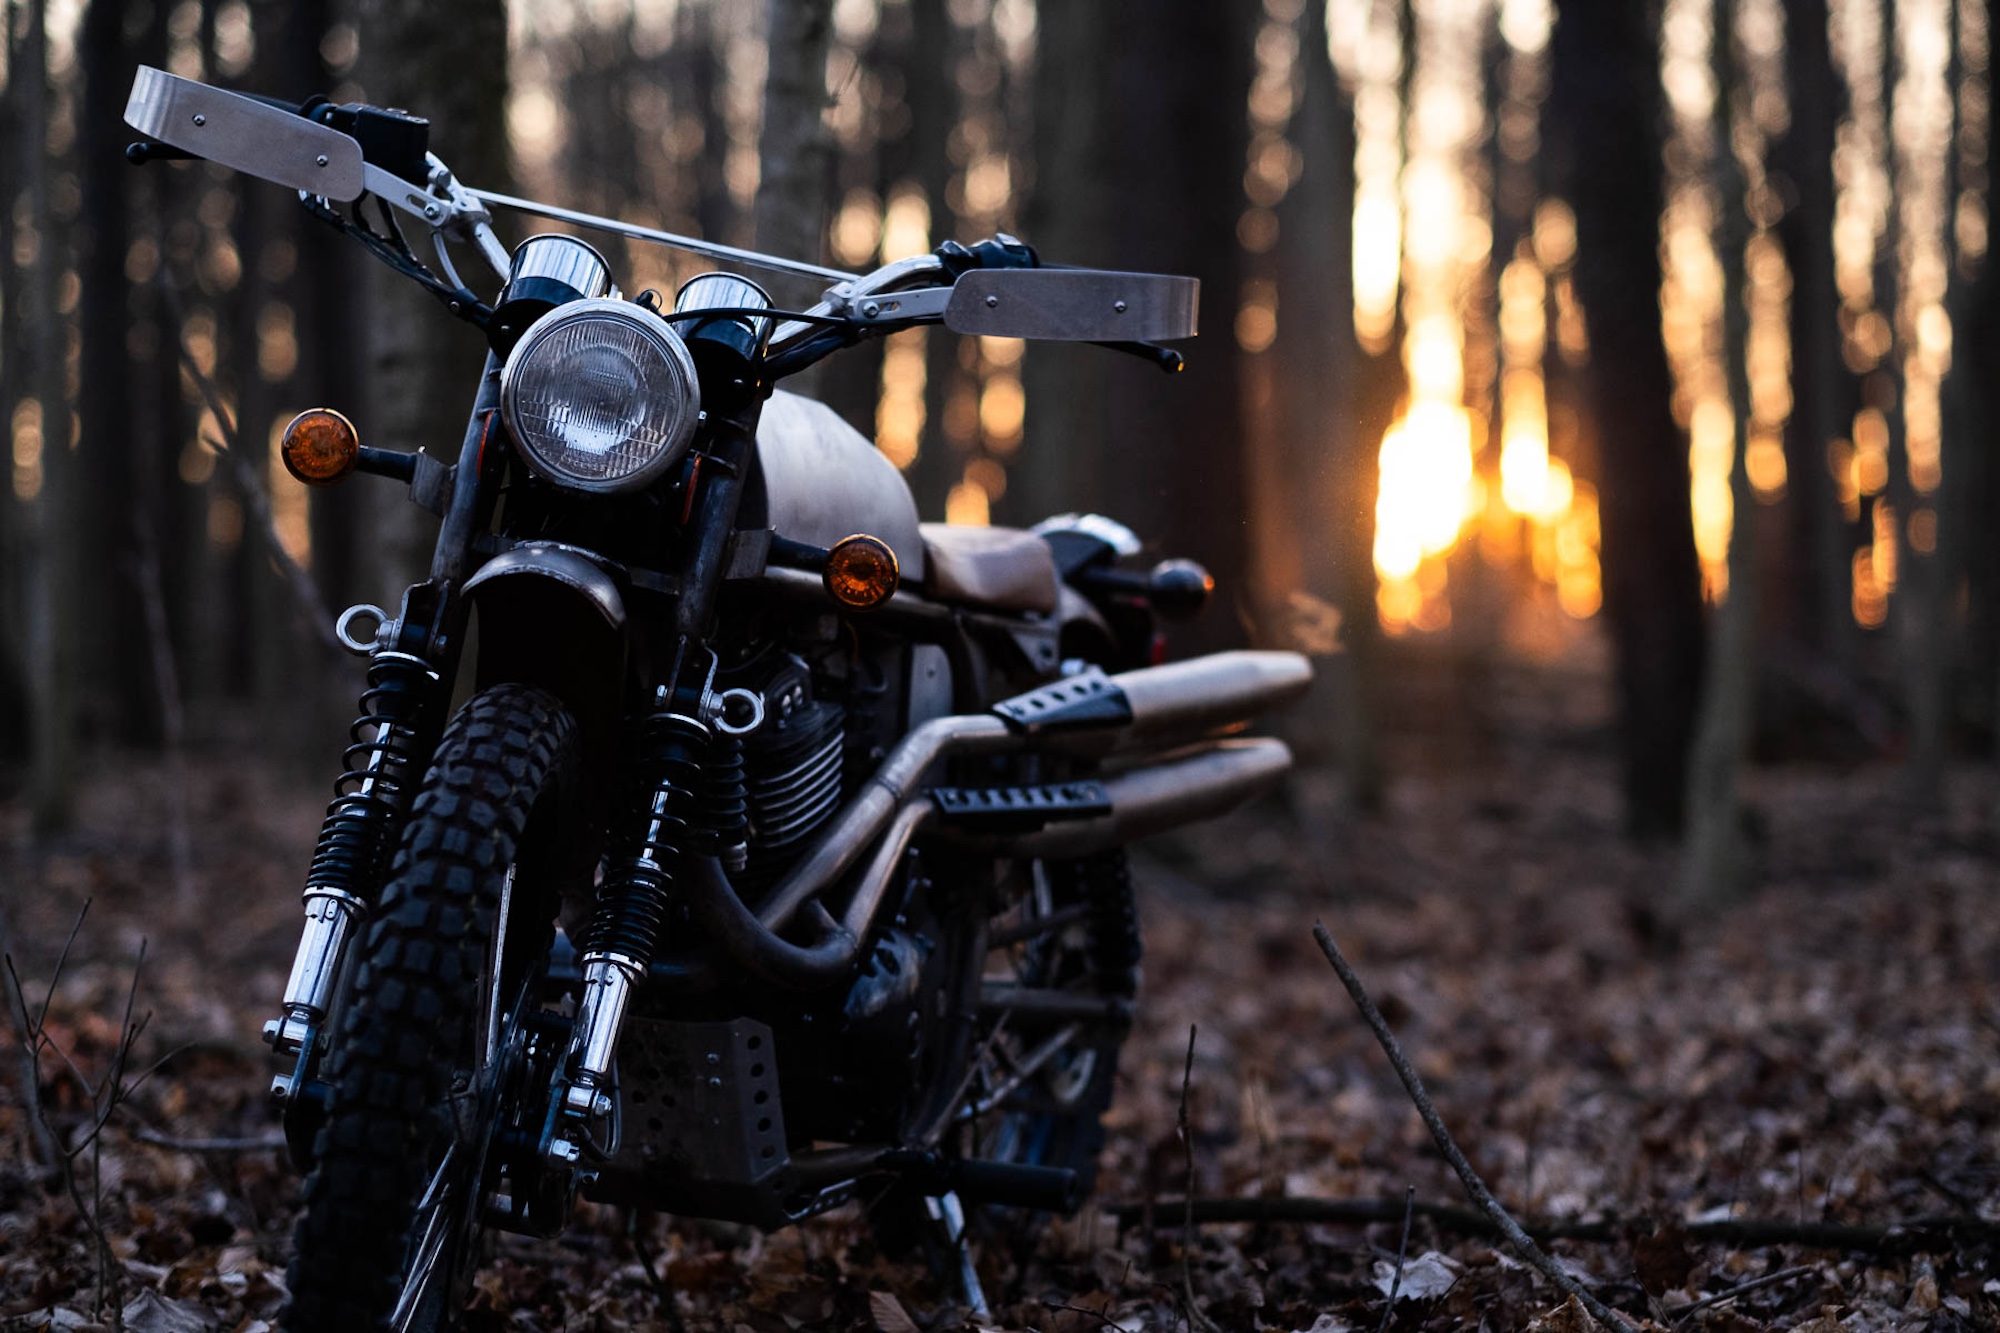 A scrambler motorcycle in the woods.